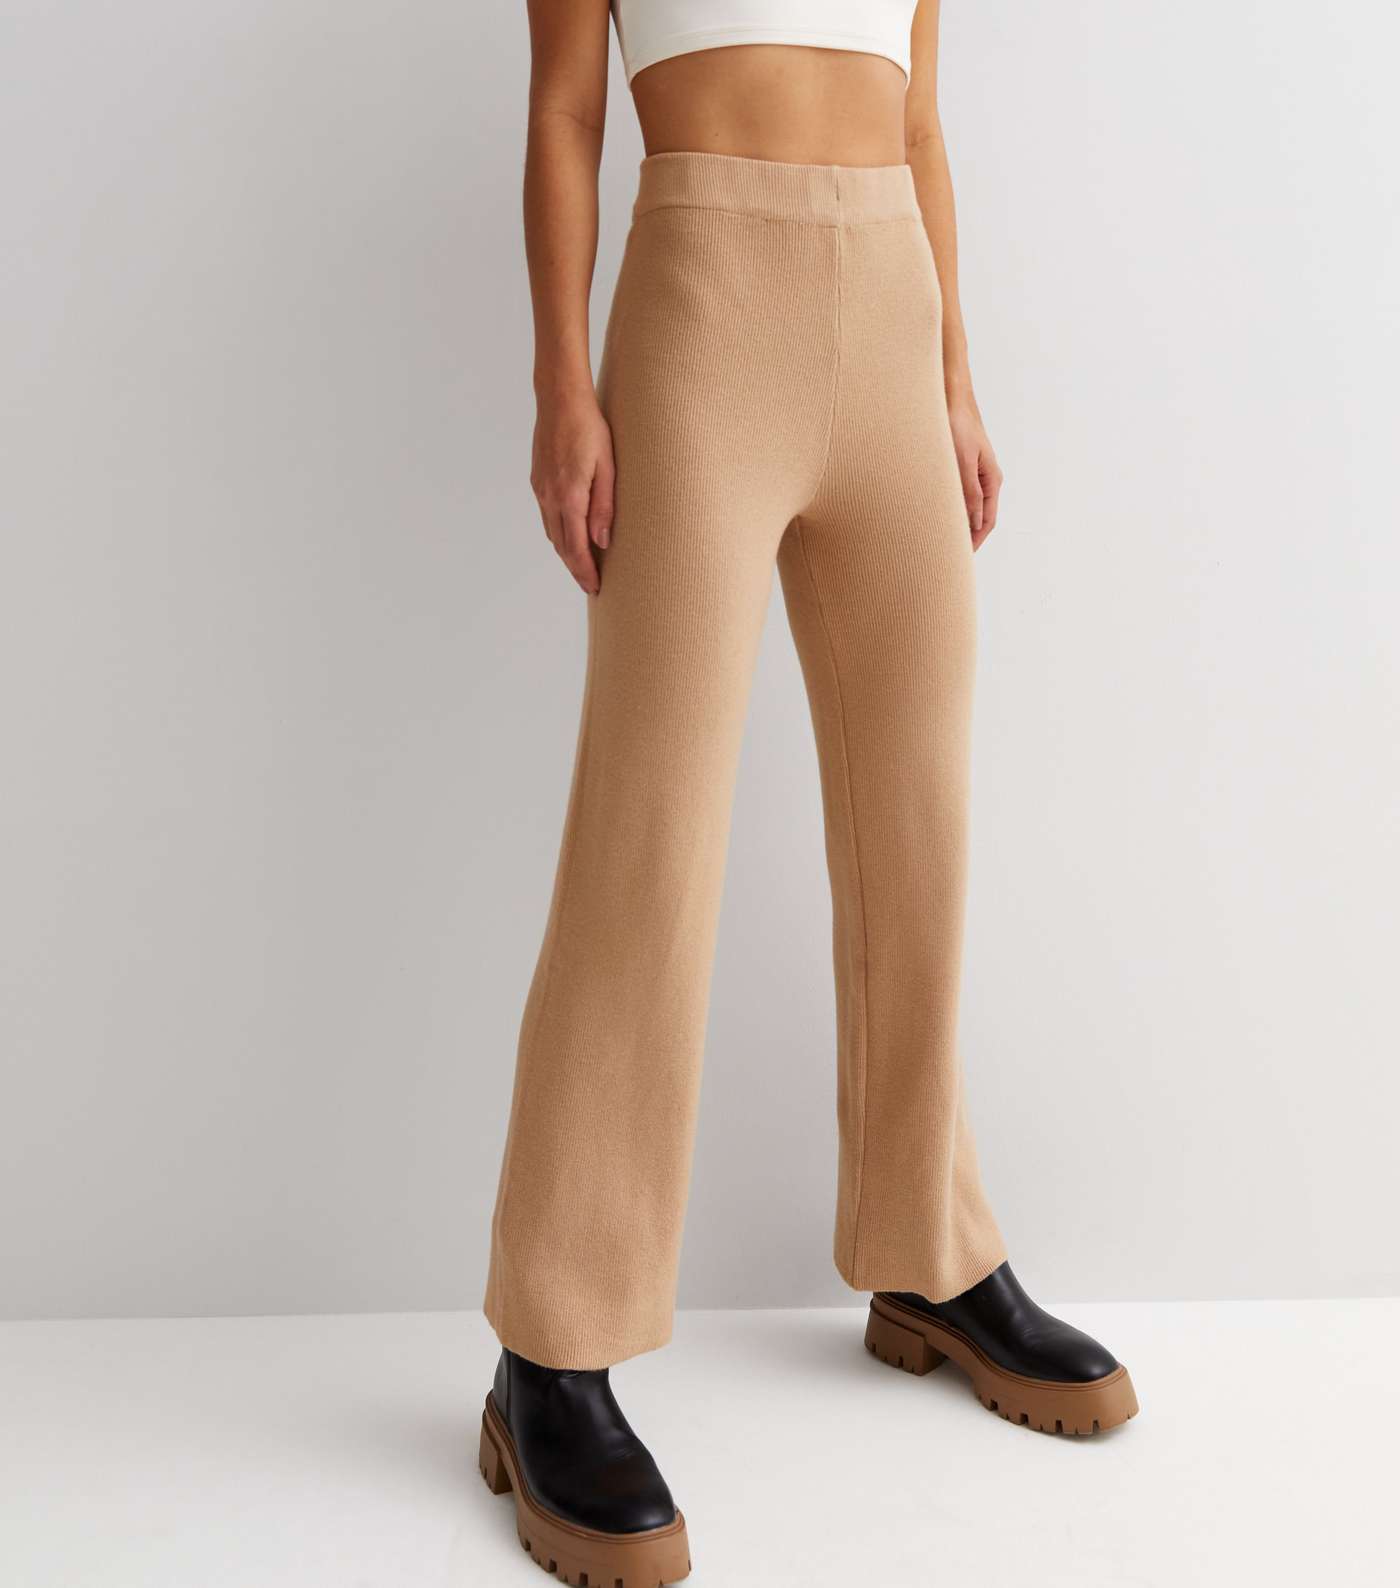 Gini London Light Brown Ribbed Knit High Waist Trousers Image 2